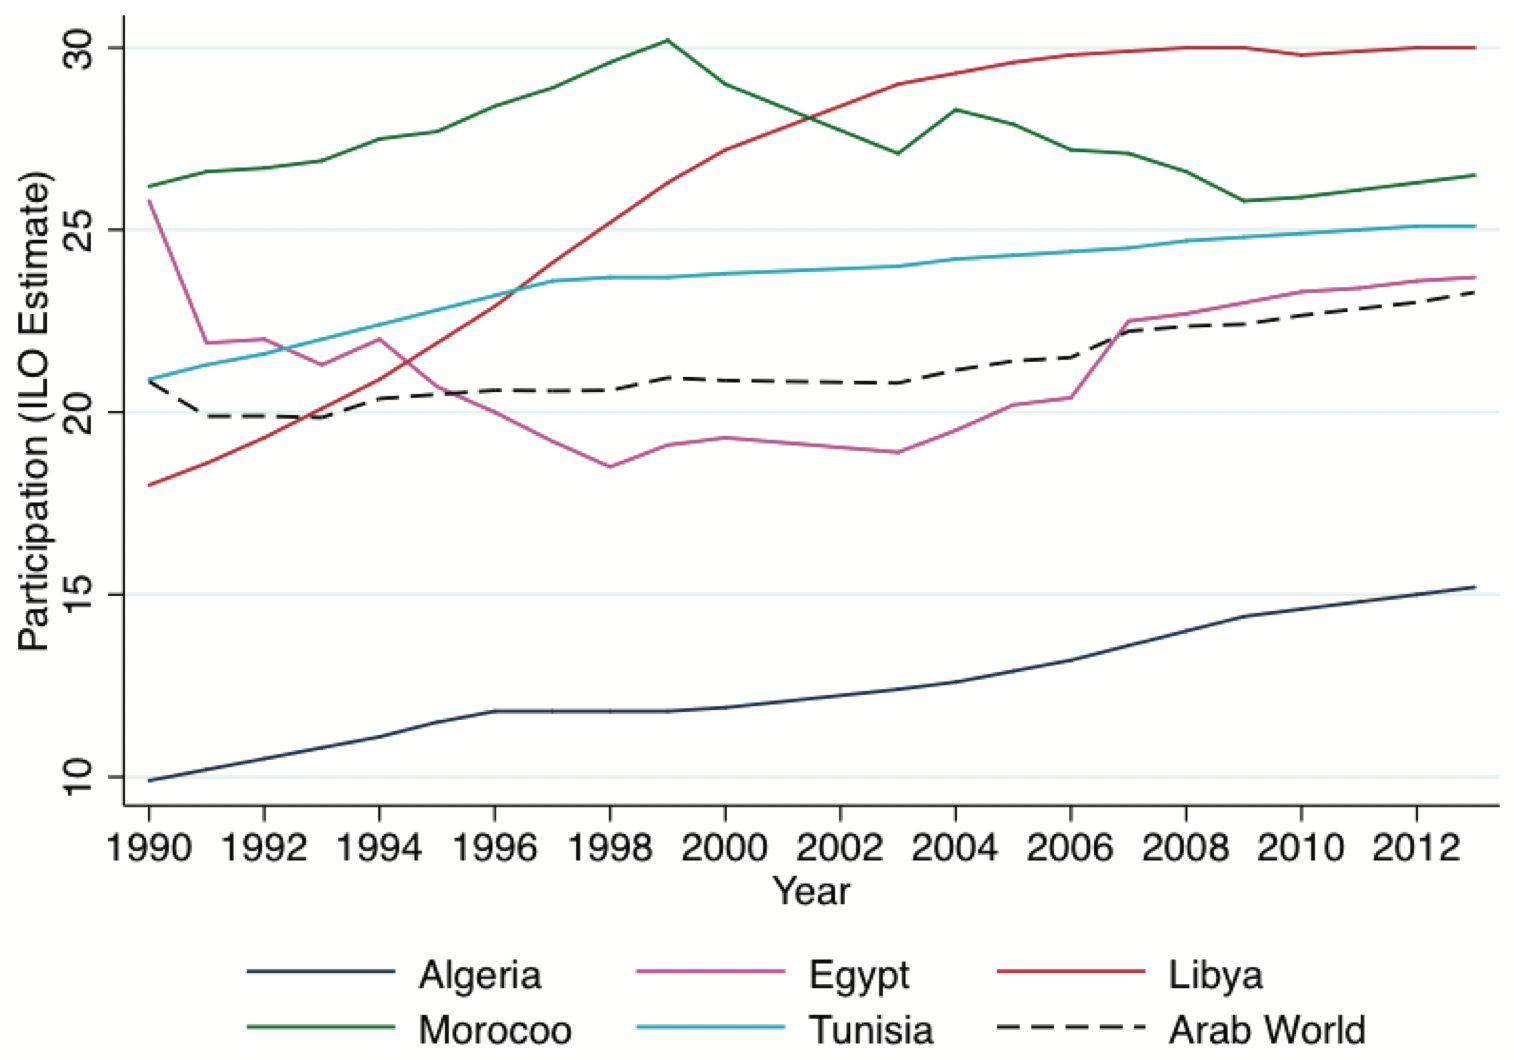 This graph compares female labor force participation in North Africa over time.